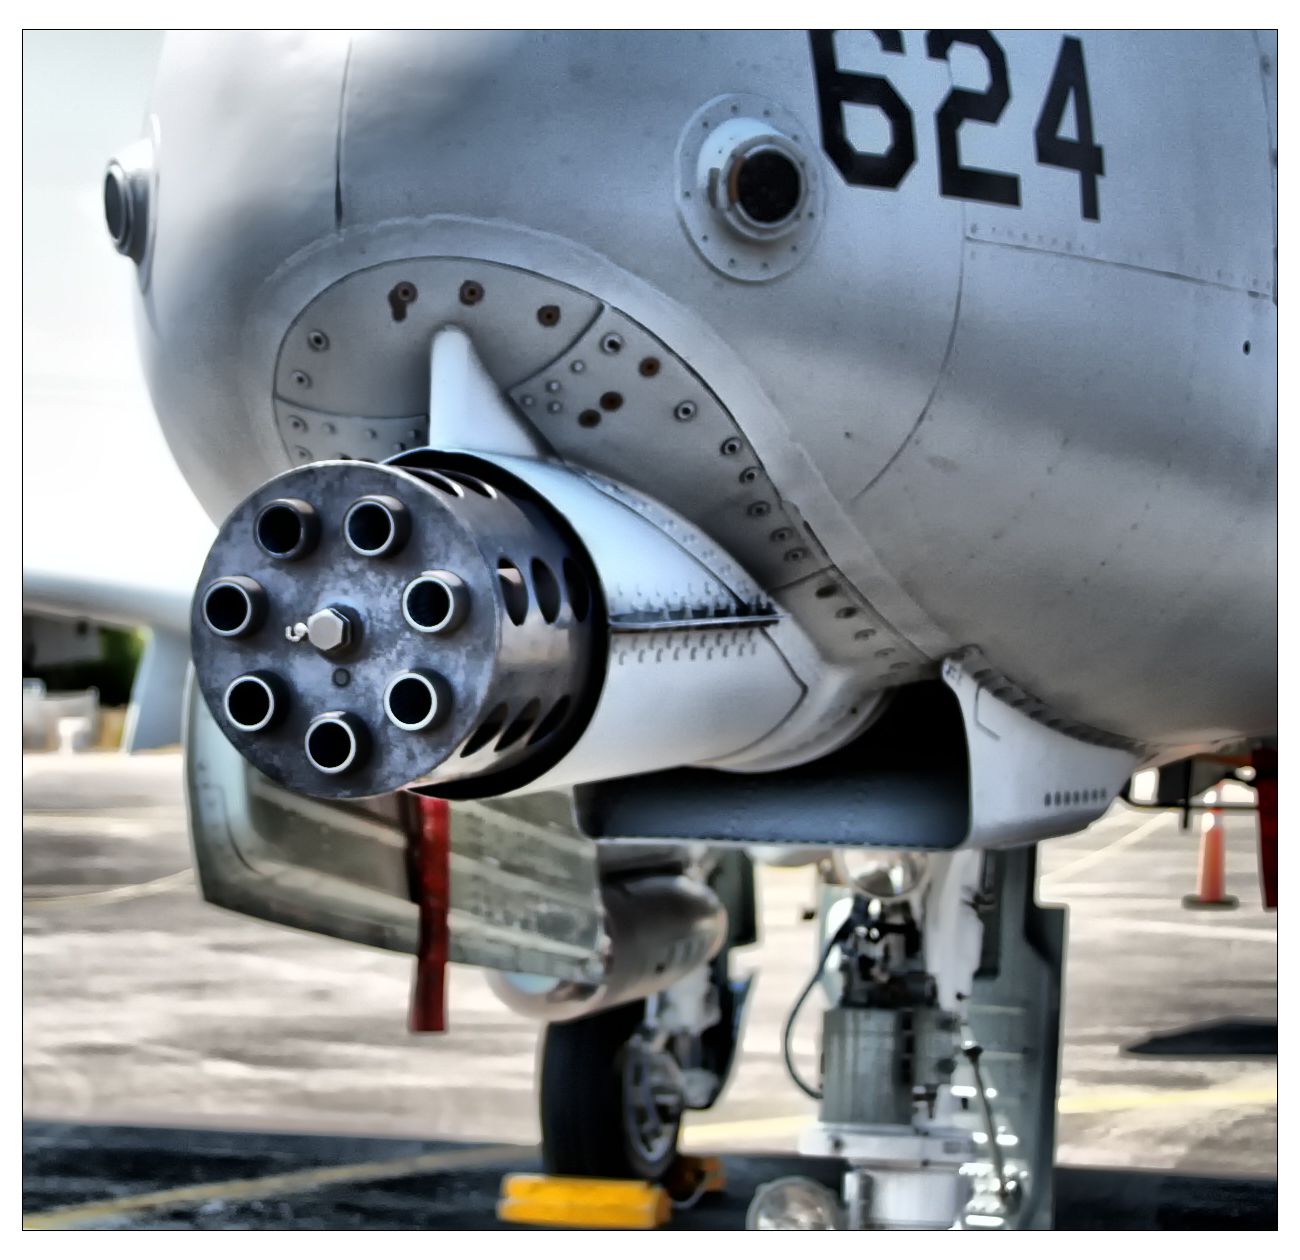 A-10s Strike Targets In Iraq, But Not Syria